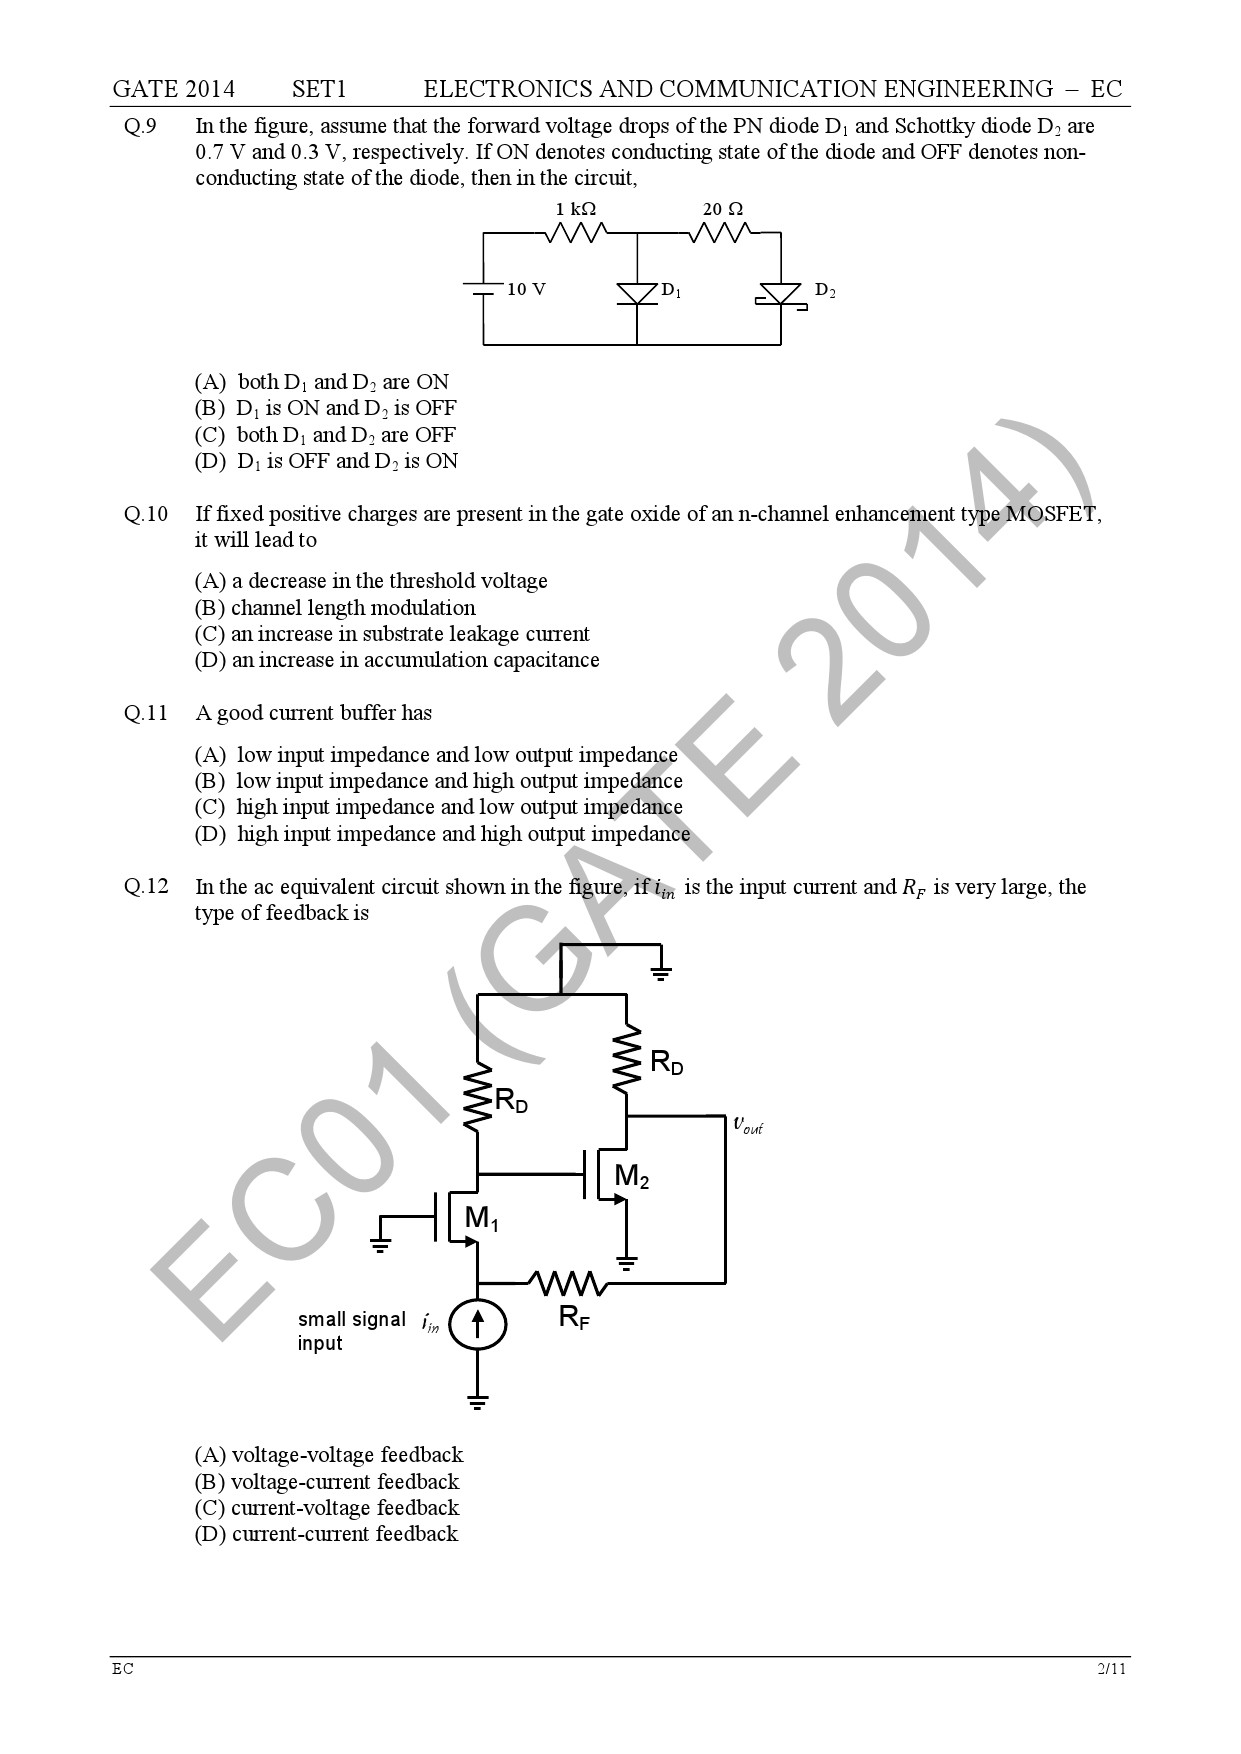 GATE Exam Question Paper 2014 Electronics and Communication Engineering Set 1 8